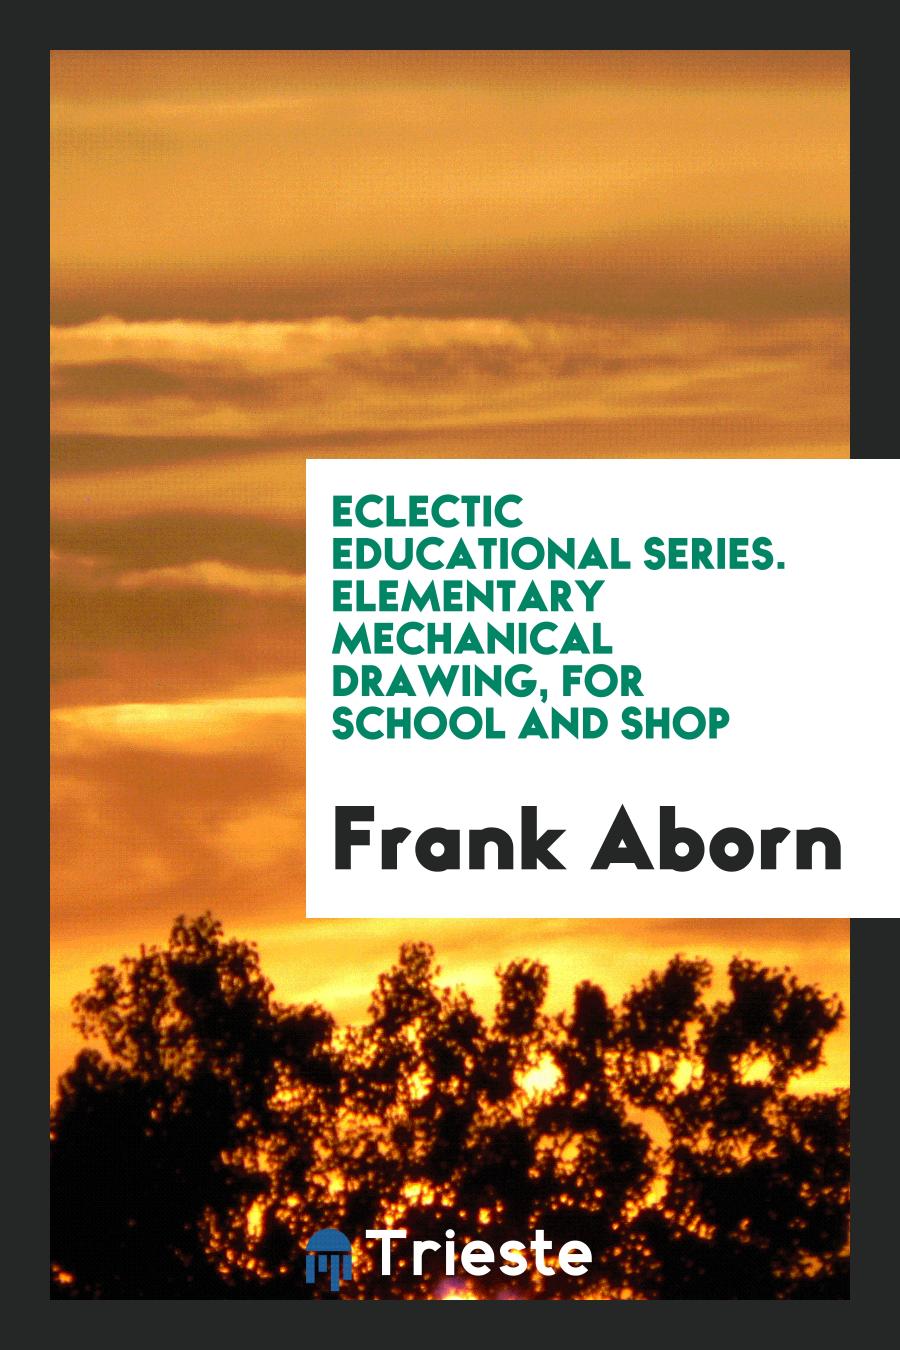 Eclectic Educational Series. Elementary Mechanical Drawing, for School and Shop